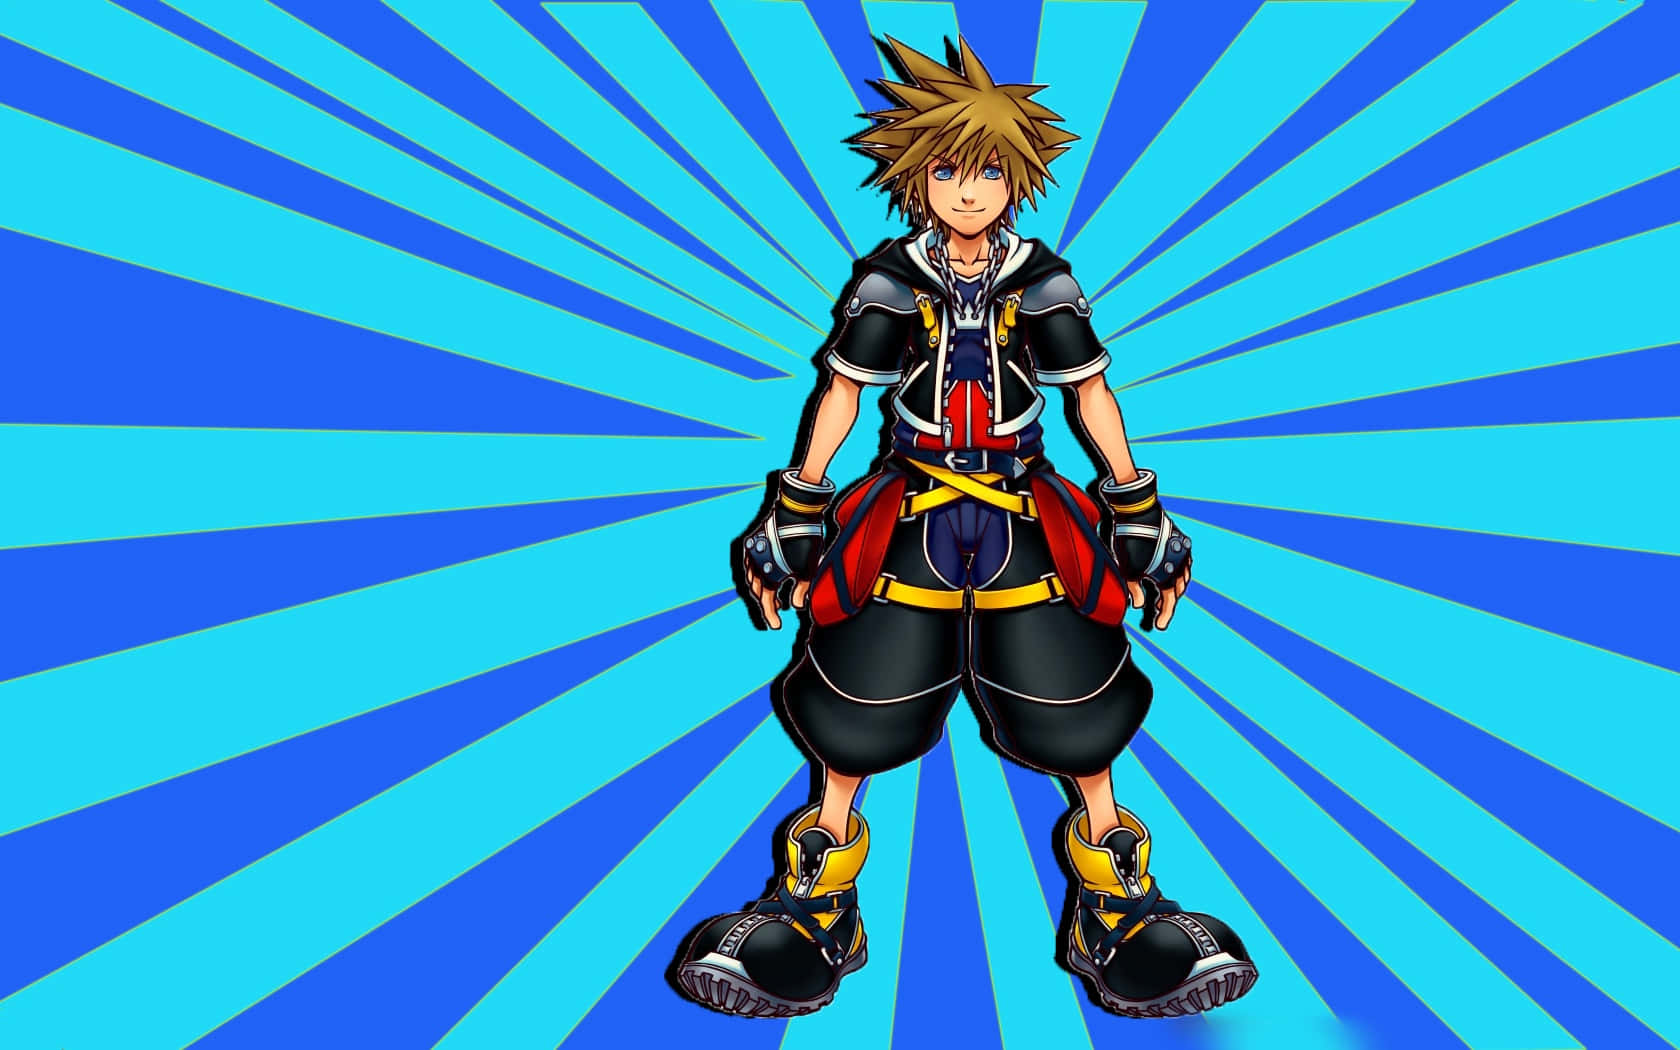 "You are not alone in your journey through Kingdom Hearts."